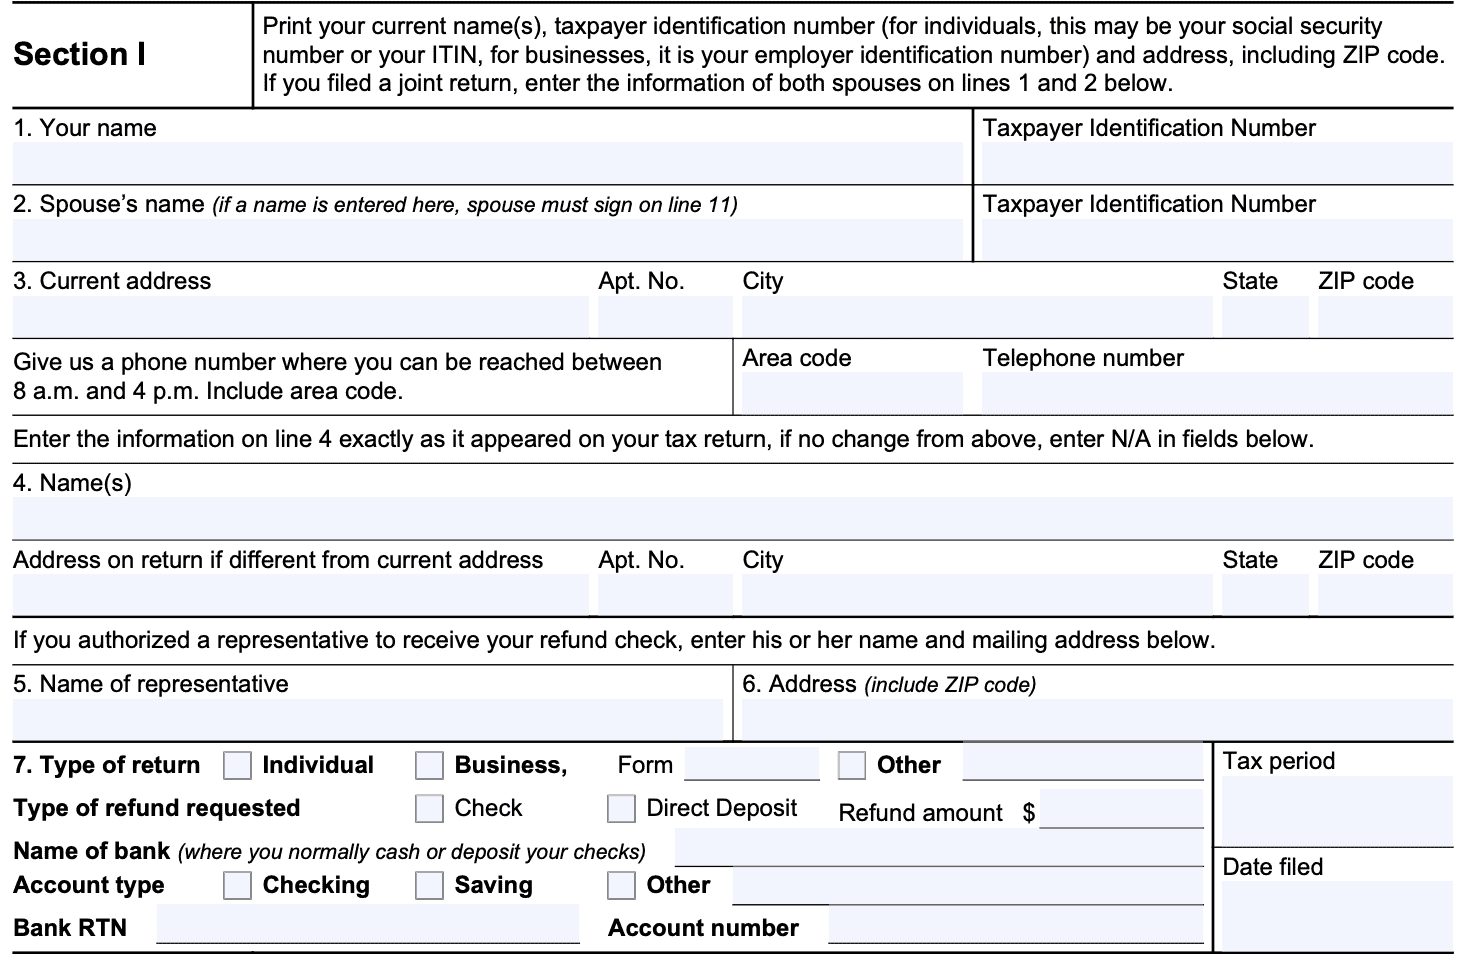 Form 3911 Section 1: Tax return information